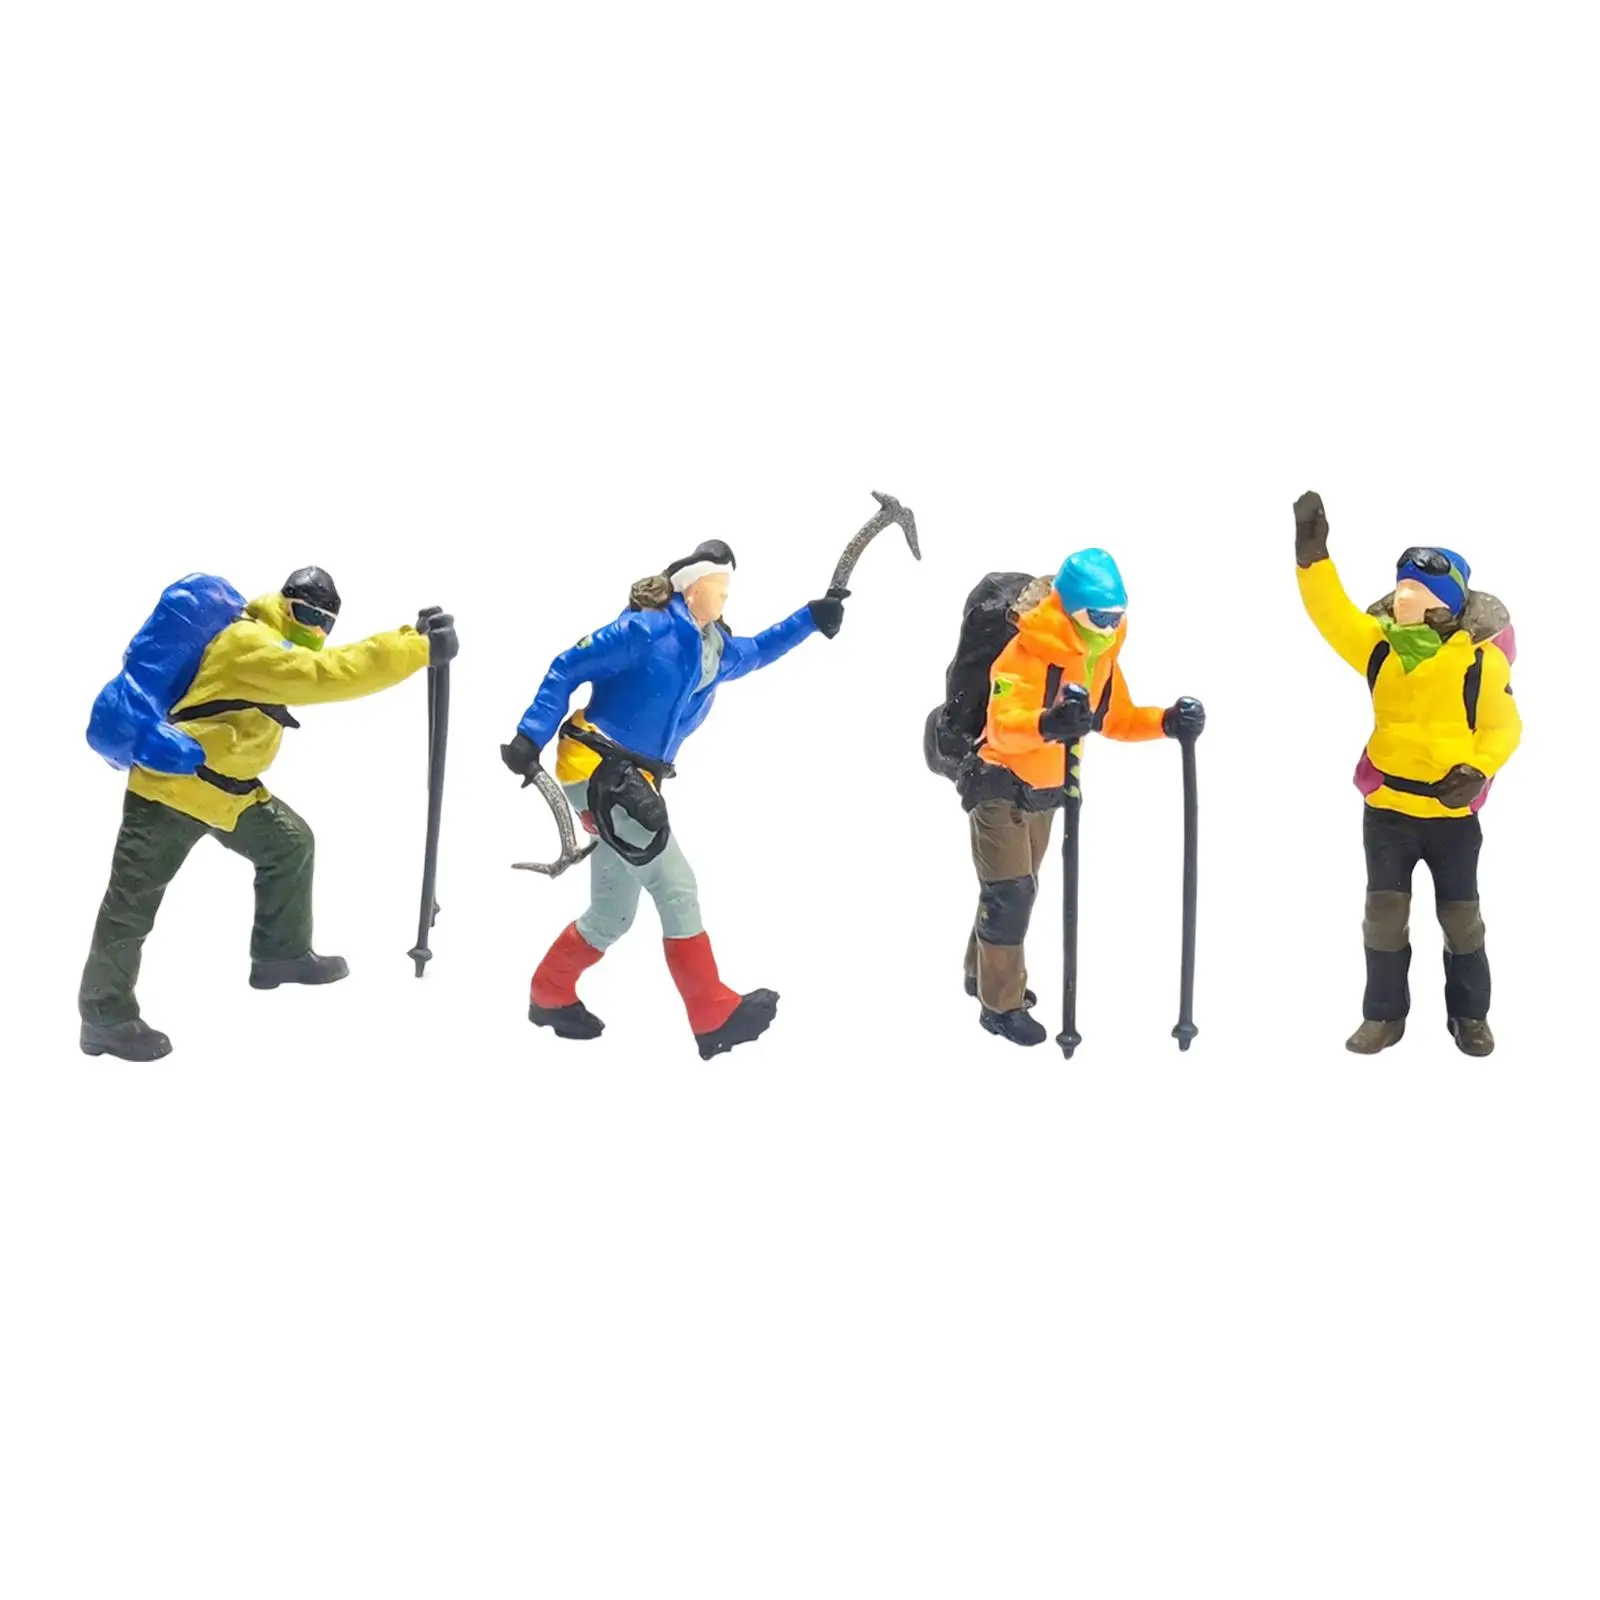 1/64 Climbing People Figures Miniature People Model Ornament Tiny People for DIY Projects DIY Scene Diorama Layout Decoration